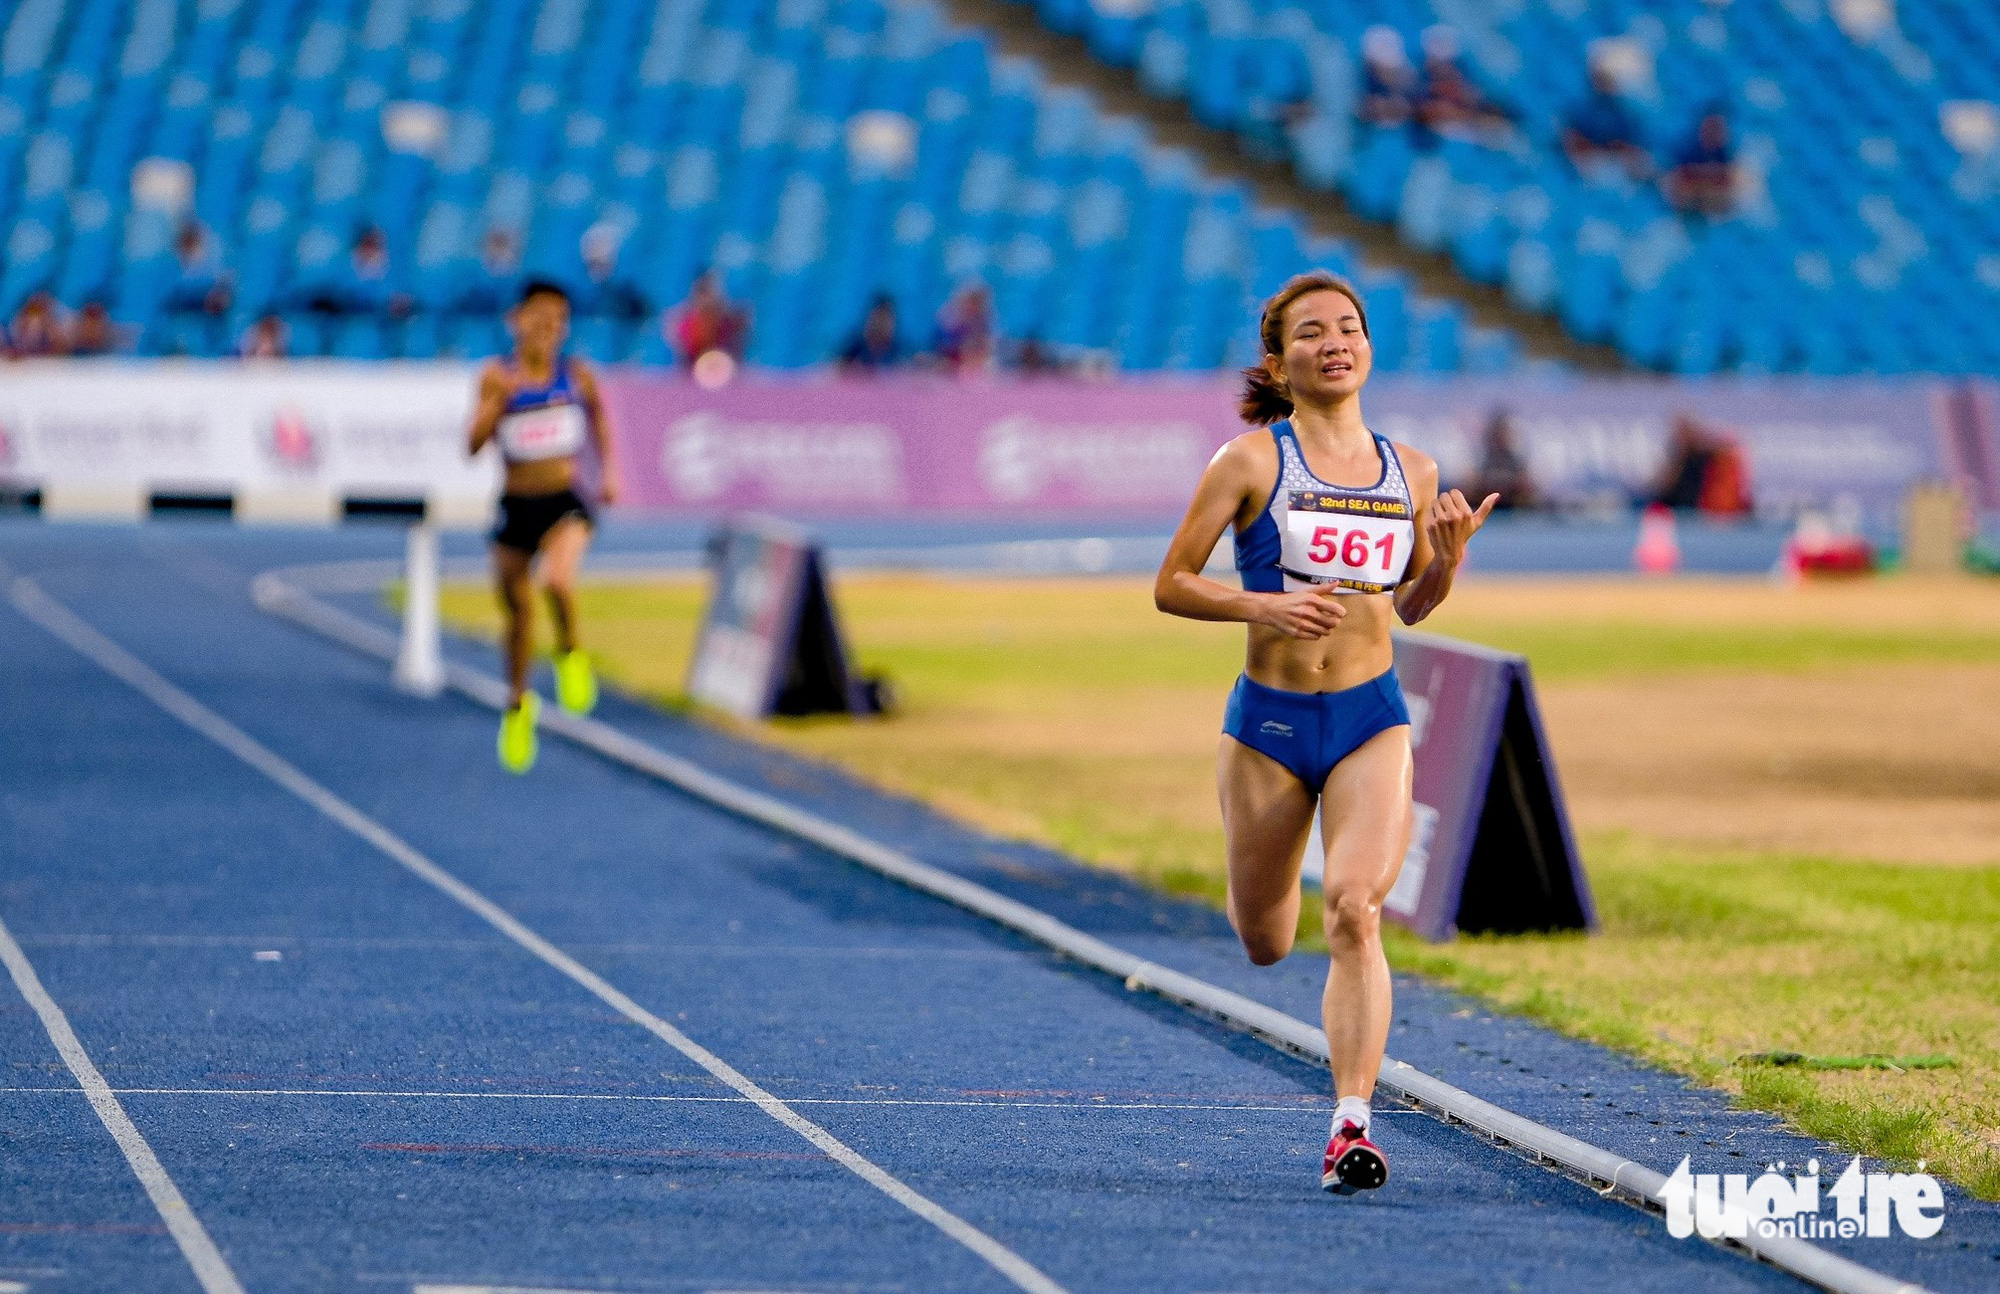 Vietnamese runner Nguyen Thi Oanh finishes first in women’s 1,500-meter run at the 2023 Southeast Asian Games in Cambodia, May 9, 2023. Photo: Nam Tran / Tuoi Tre